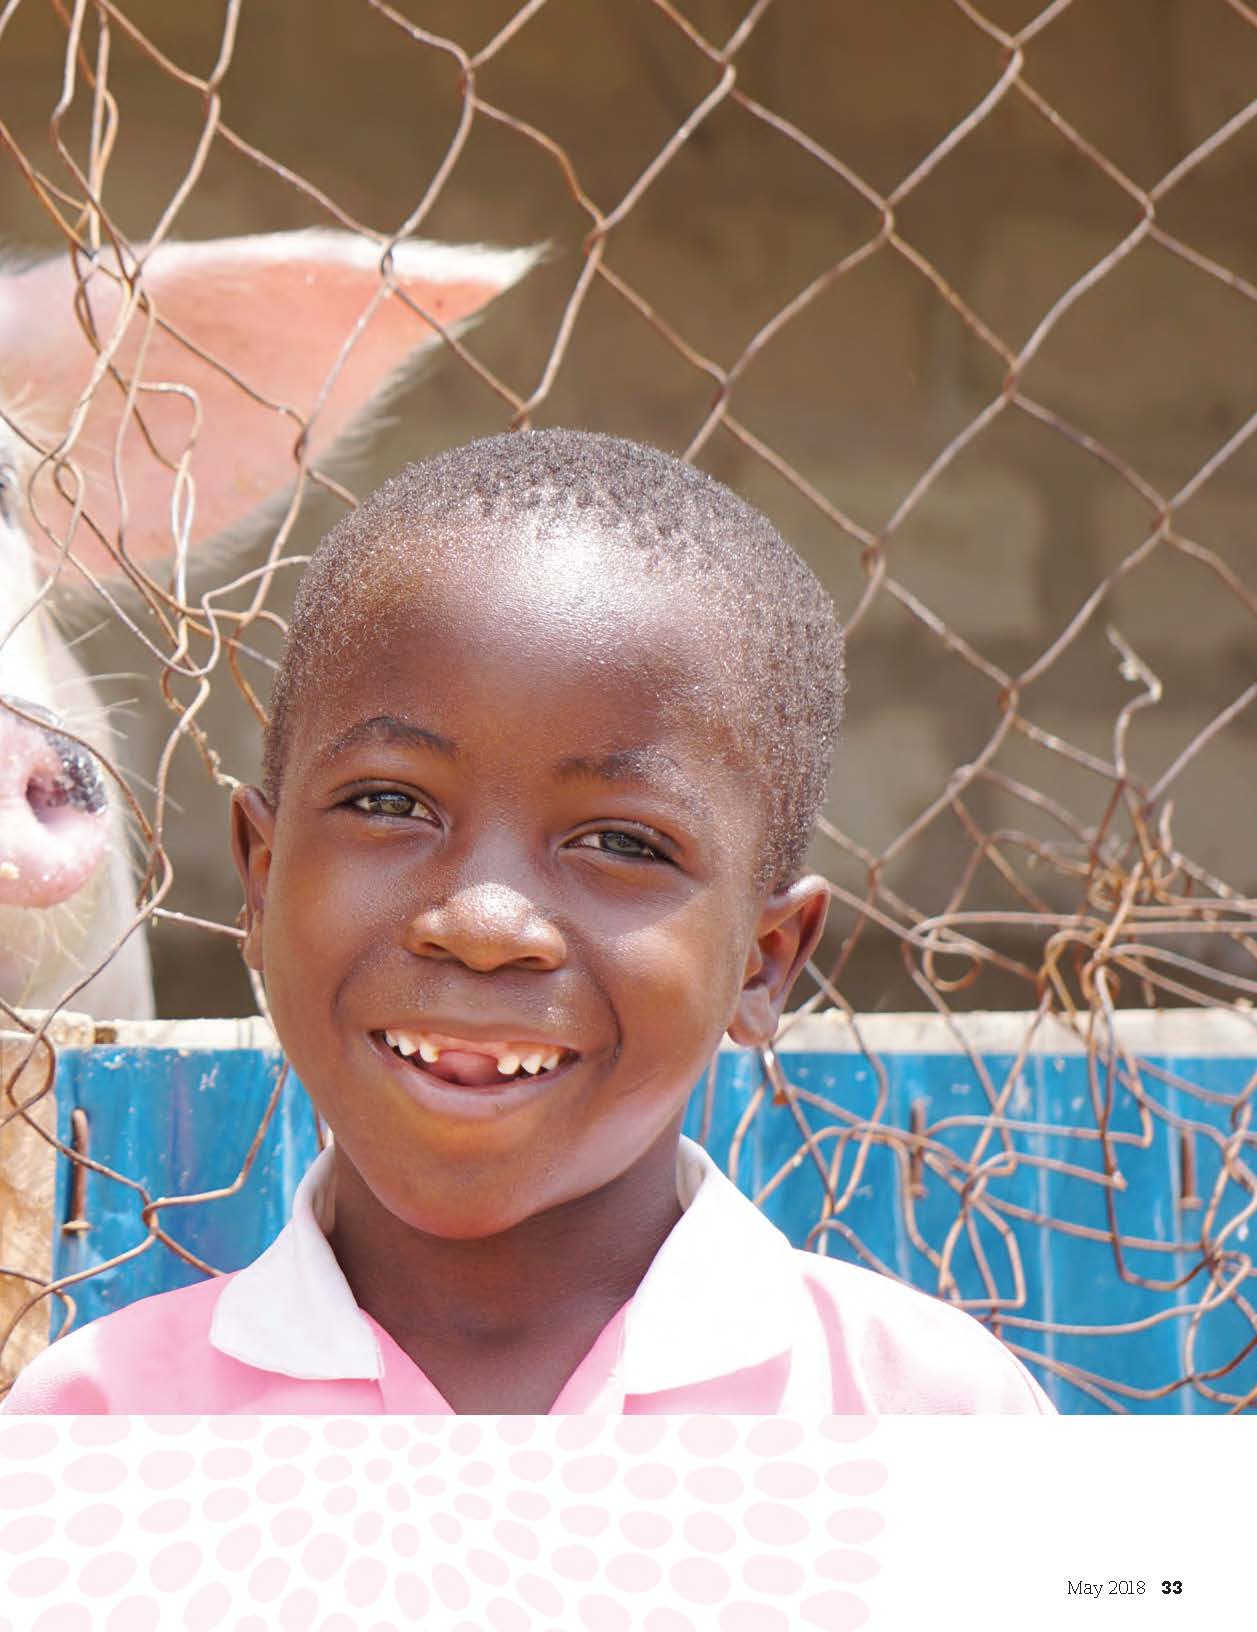 an orphan boy in Tanzania Africa helped by the valentine project